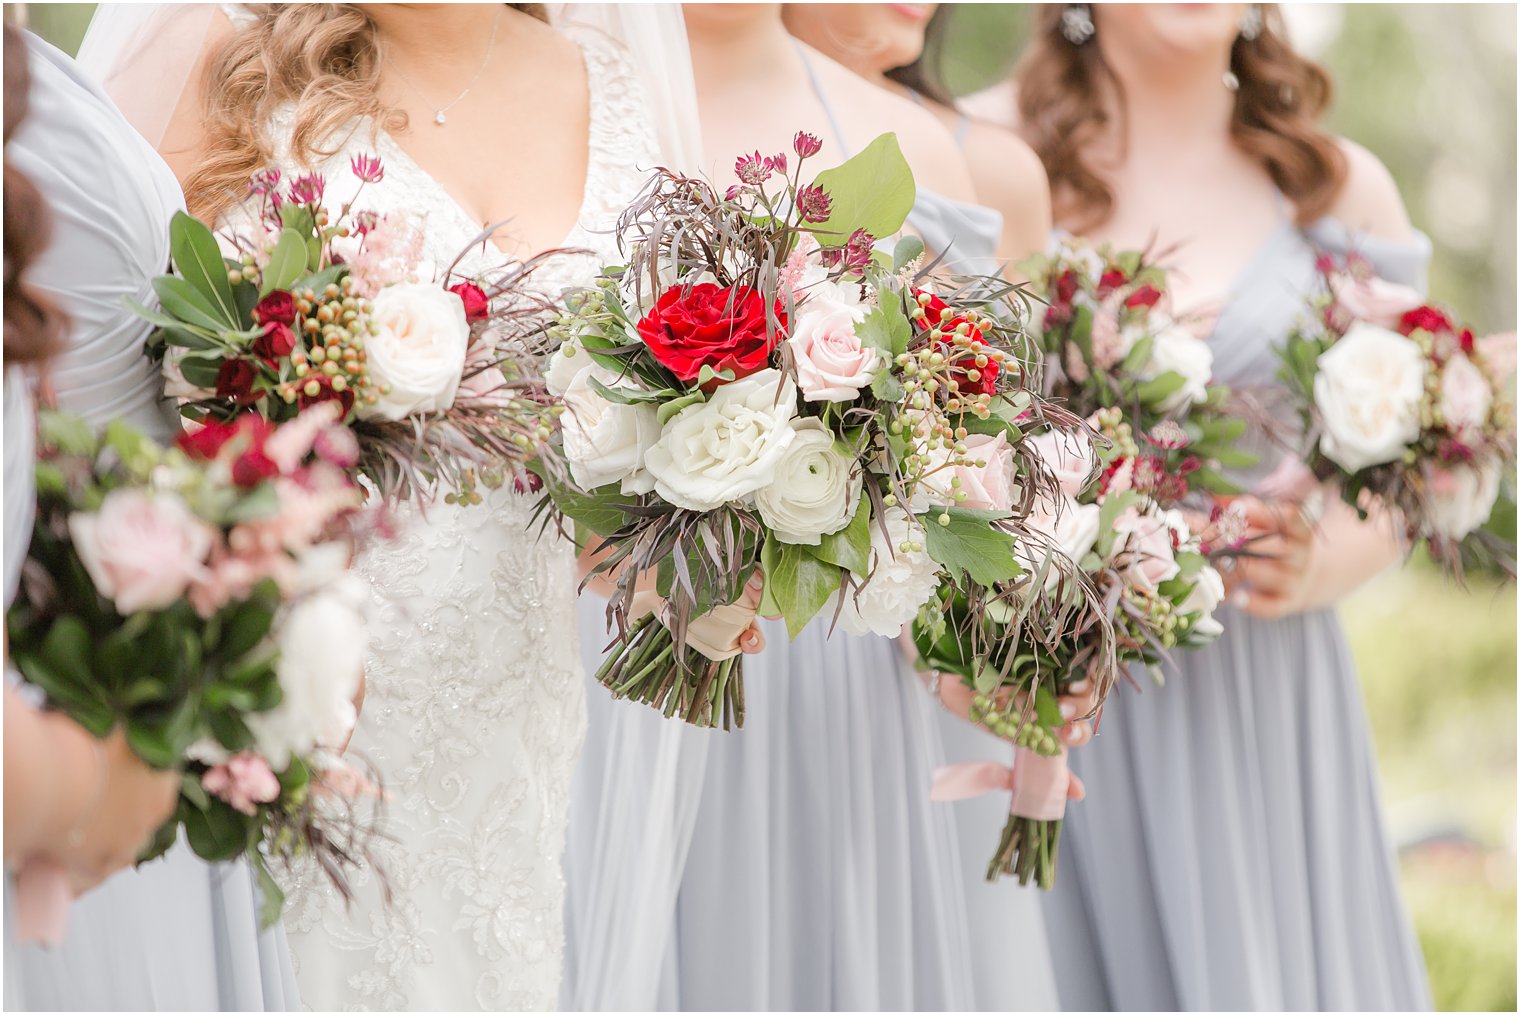 Bride and bridesmaid bouquets by Petal Pushers Magnolia